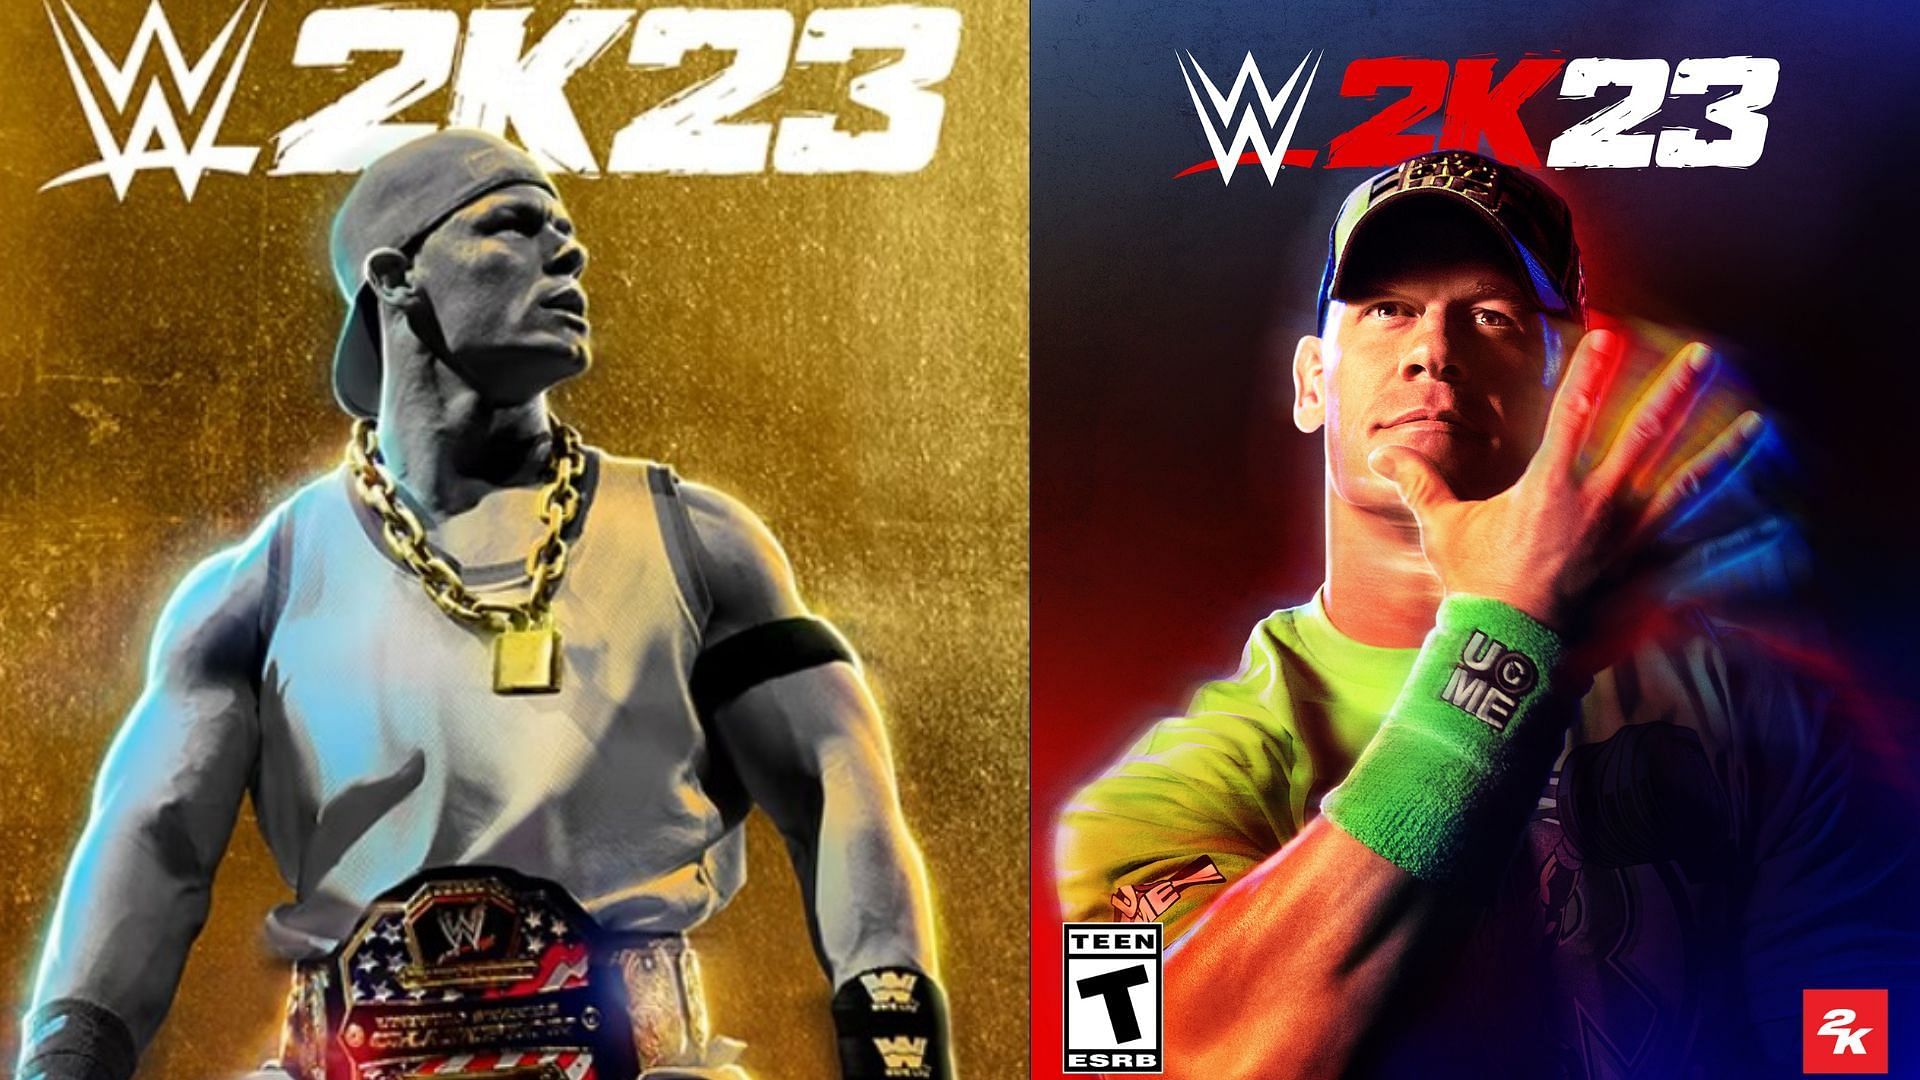 WWE 2K23 Deluxe Edition has a variety of exciting features